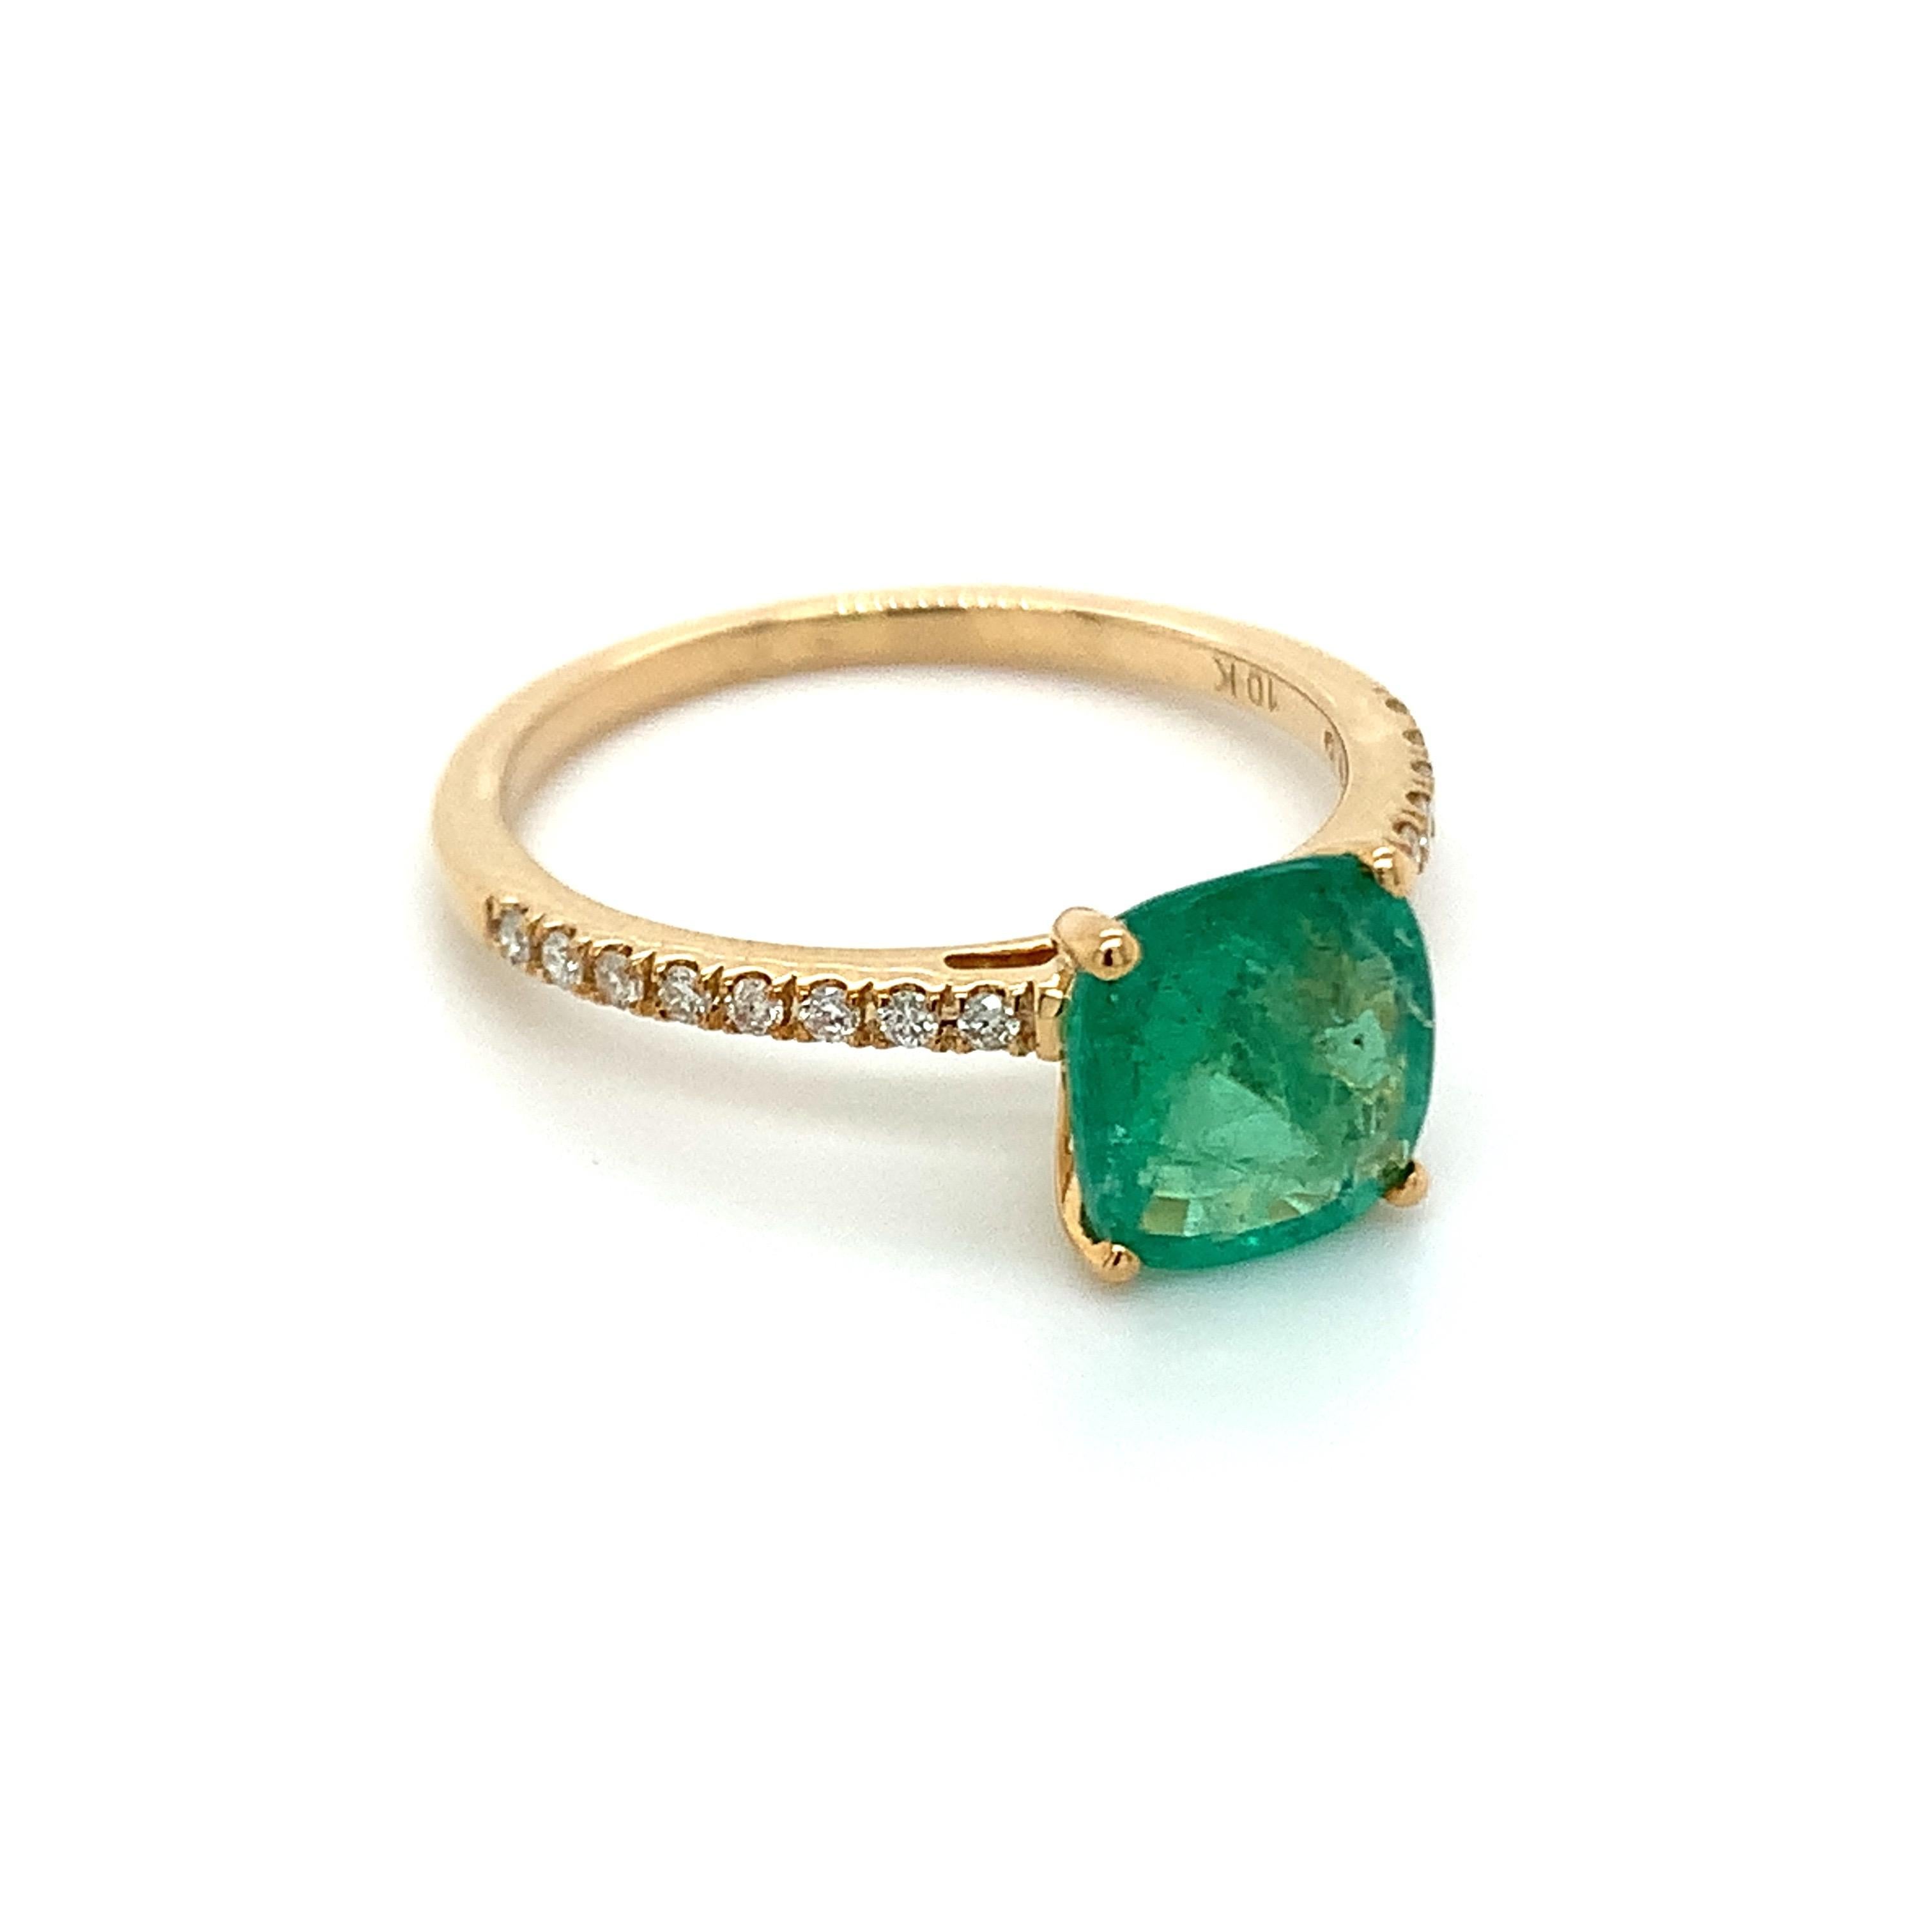 Cushion shape emerald gemstone beautifully crafted in a 10K yellow gold ring with natural diamonds.

With a vibrant green color hue. The birthstone for May is a symbol of renewed spring growth. Explore a vast range of precious stone Jewelry in our